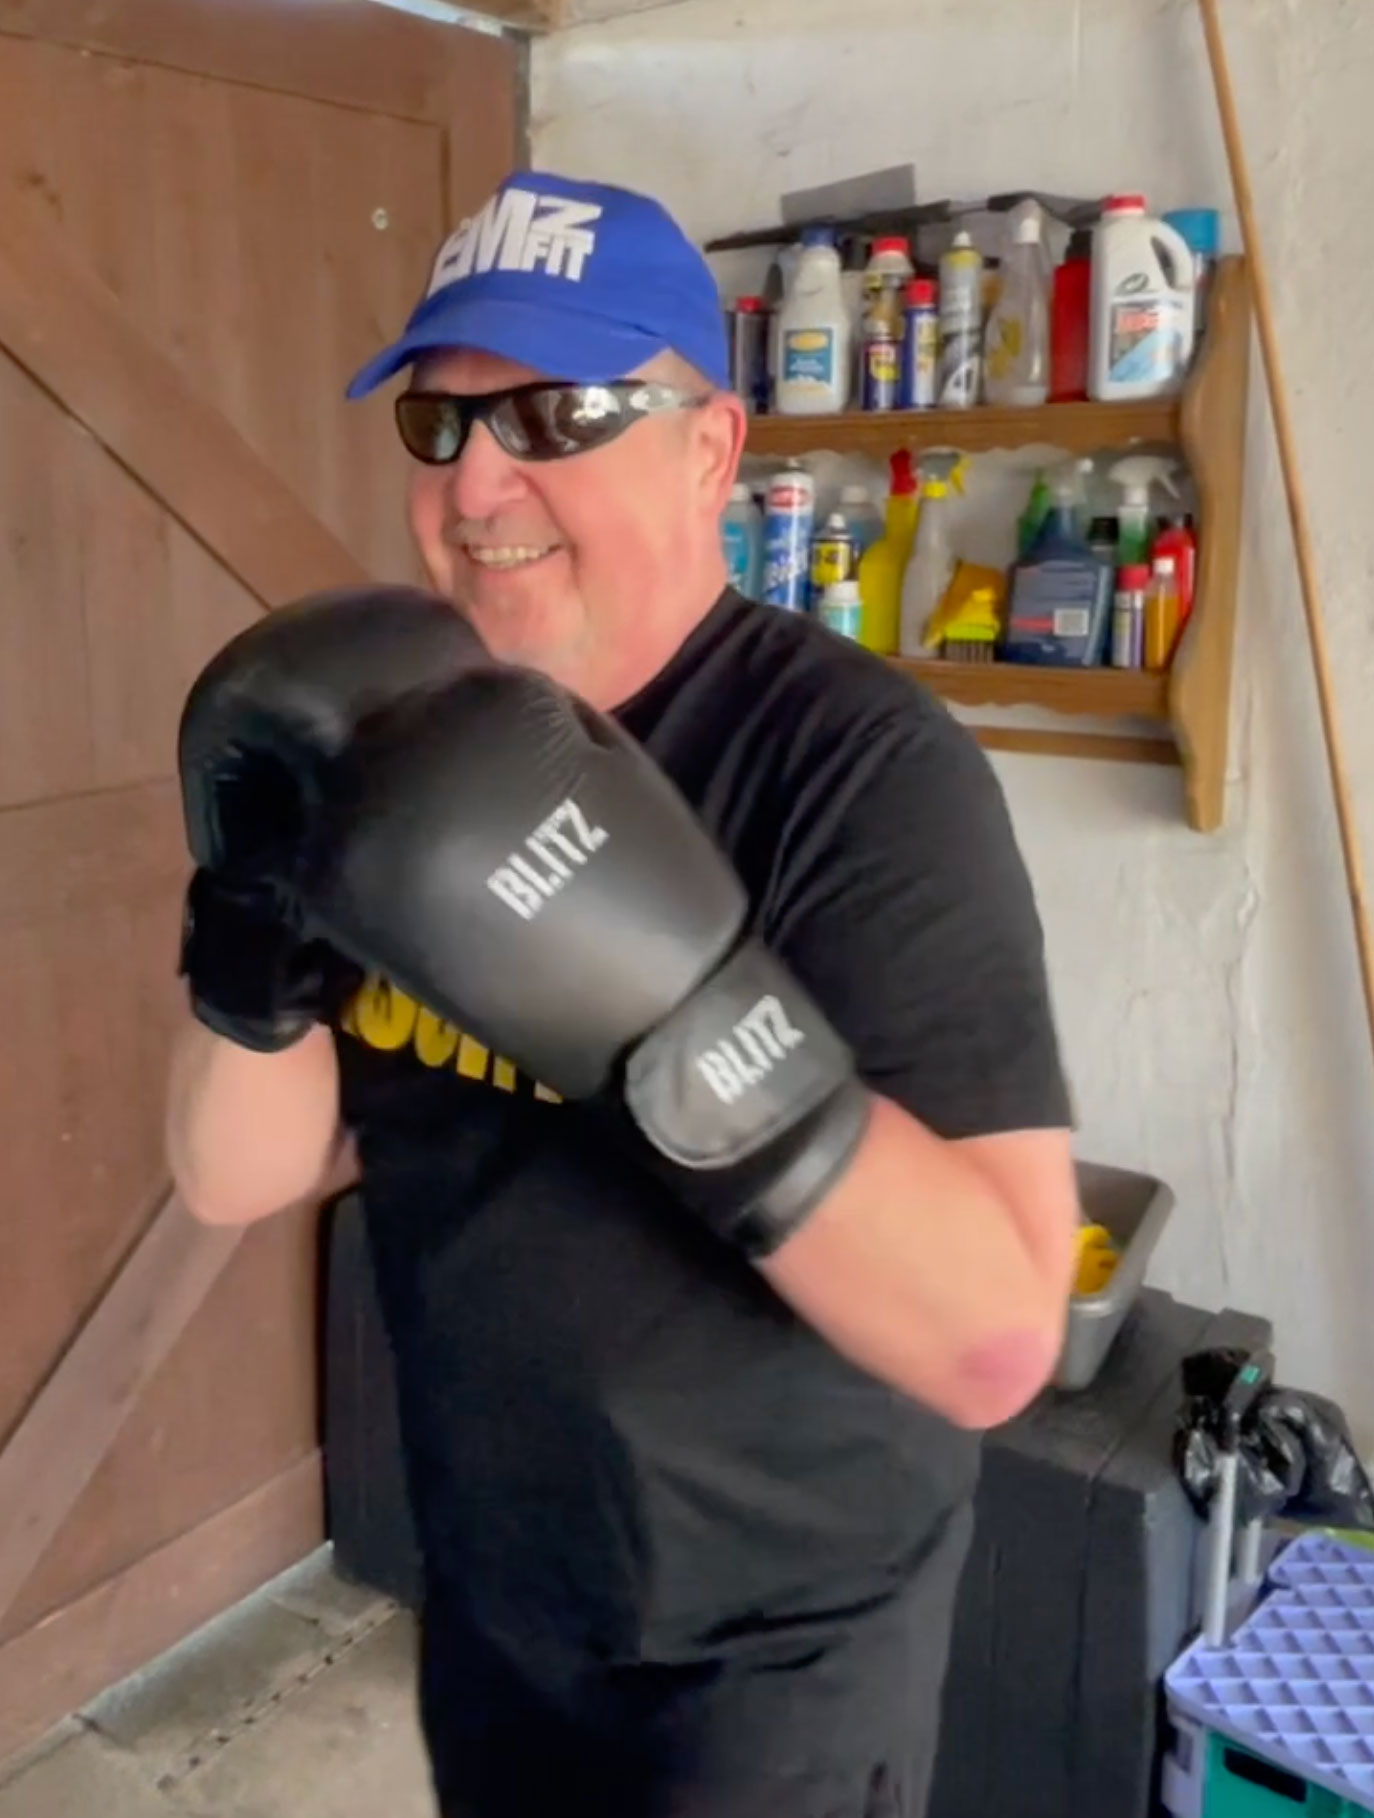 James Connell, Merseyside SLC member, holding his arms up in a sparring pose. He is wearing black boxing gloves, sunglasses, and a blue baseball hat and is smiling towards the camera.